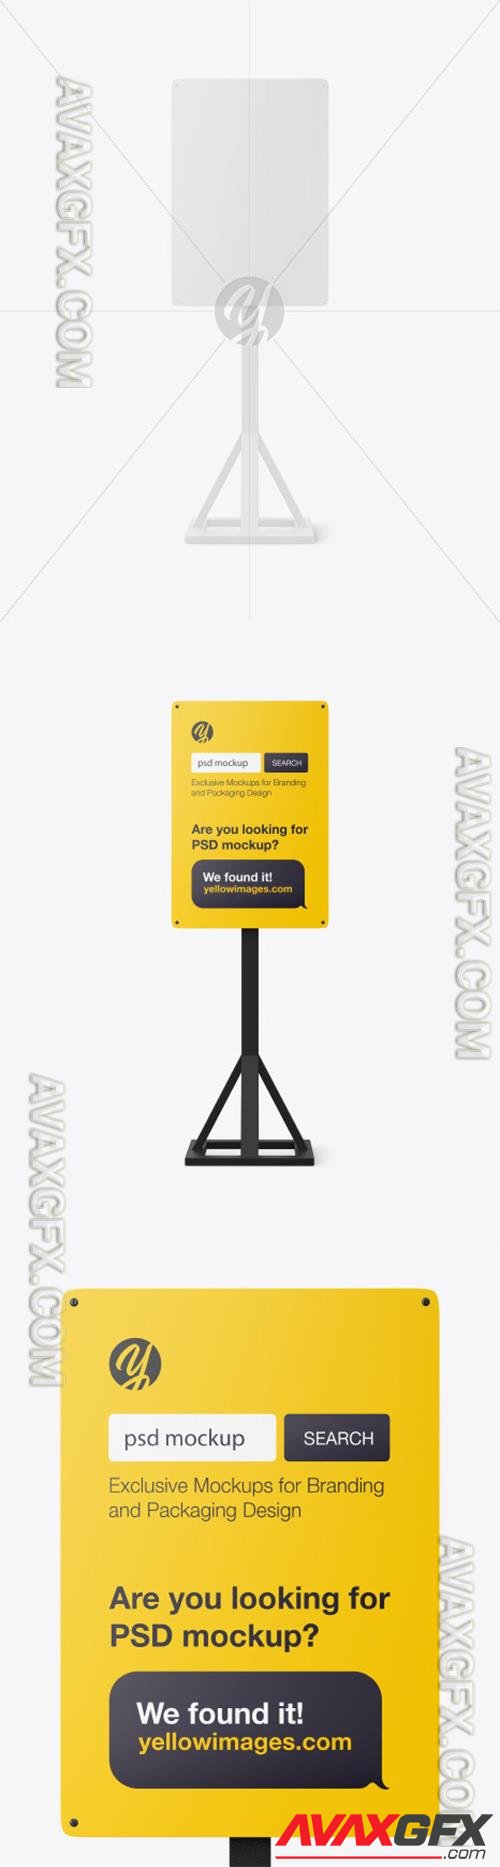 Promotional Advertising Stand Mockup 89595 TIF